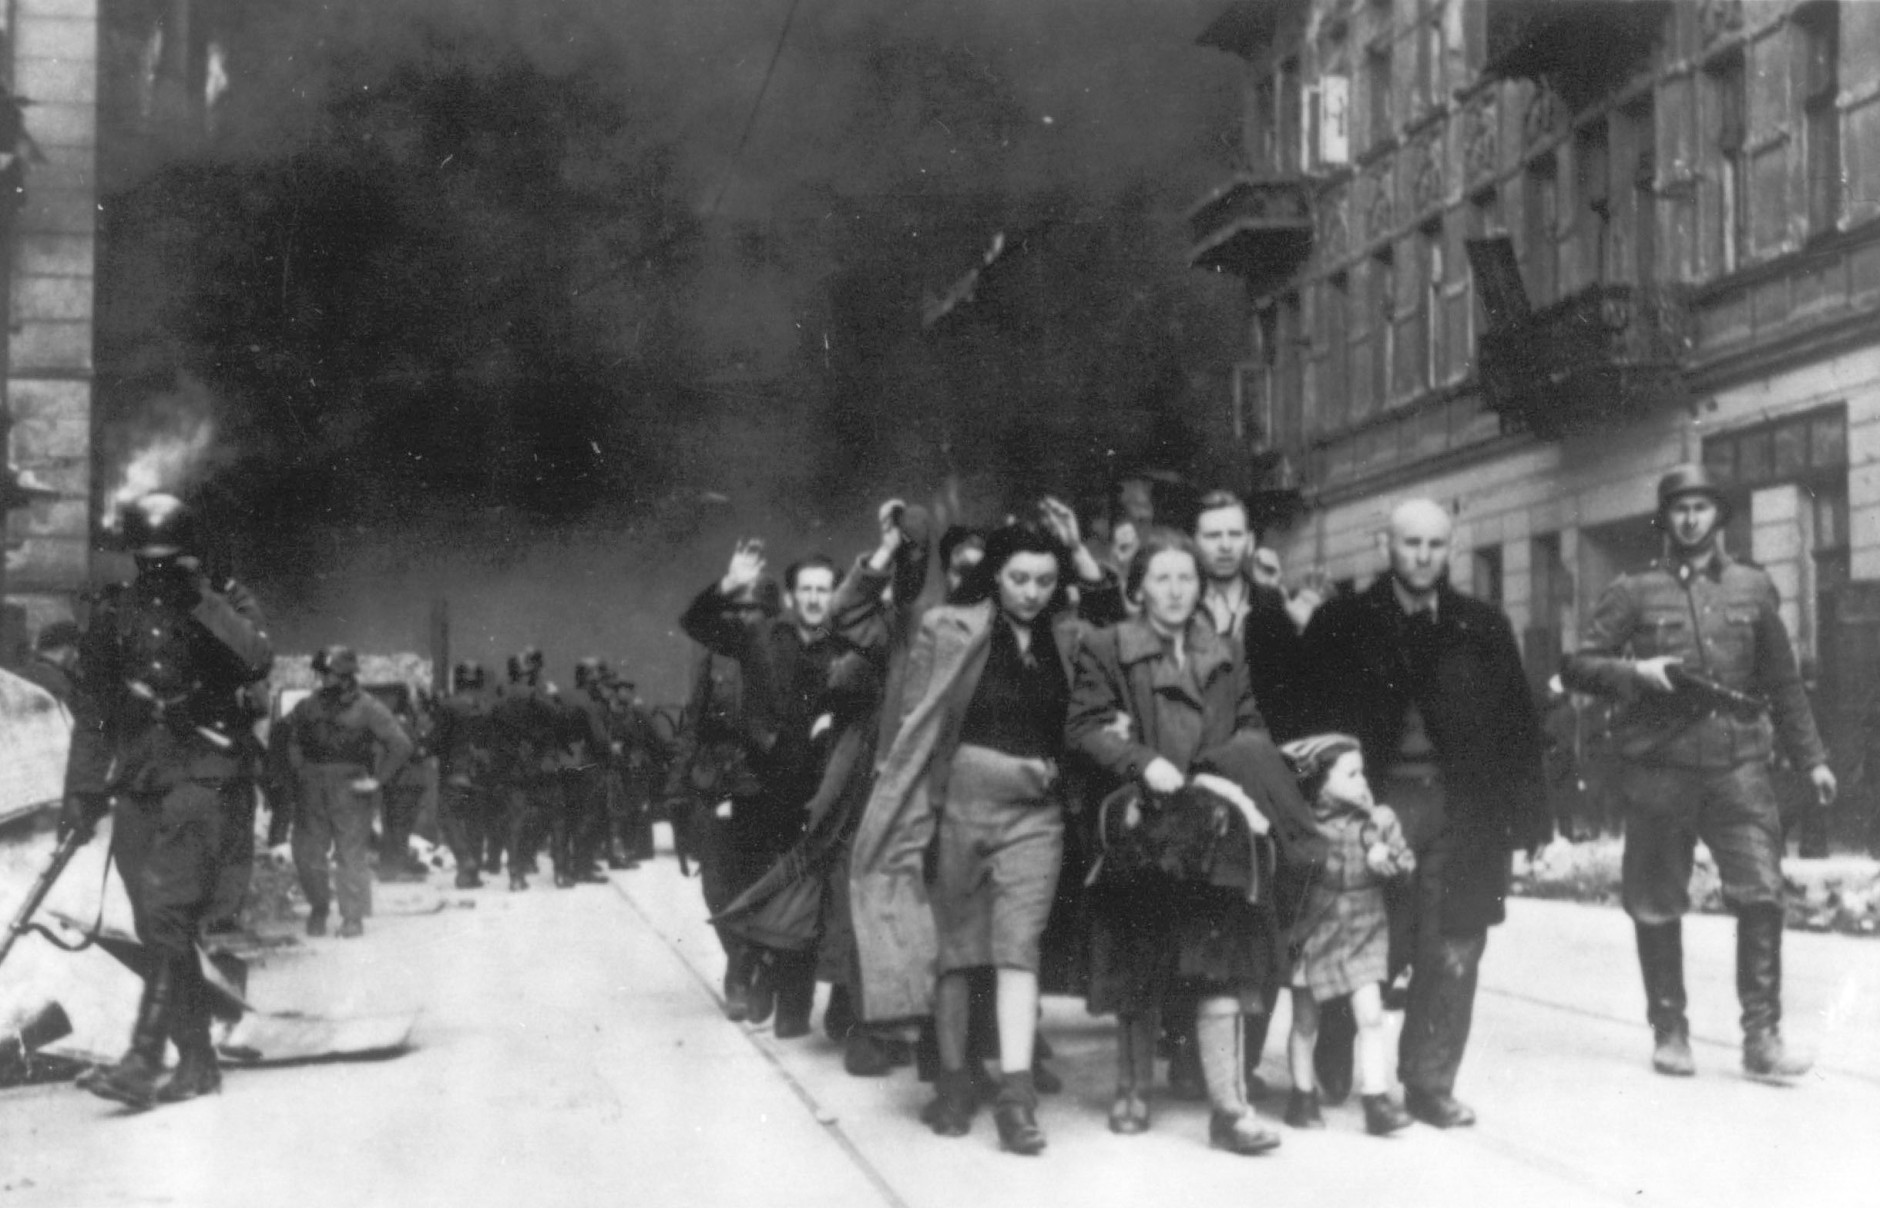 ** FILE ** In this 1943 file photo, a group of Polish Jews are led away for deportation by German SS soldiers, in April/May 1943, during the destruction of the Warsaw Ghetto by German troops after an uprising in the Jewish quarter. The family of Polish social worker Irena Sendler who is credited with rescuing 2,500 Jewish children from the Nazis during the Holocaust says she has died. Sendler's daughter, Janina Zgrzembska, says her 98-year-old mother died Monday, May 12, 2008, morning in a Warsaw hospital. Sendler organized the rescue of Jewish children from the Warsaw Ghetto during Nazi Germany's brutal World War II occupation. (AP Photo)